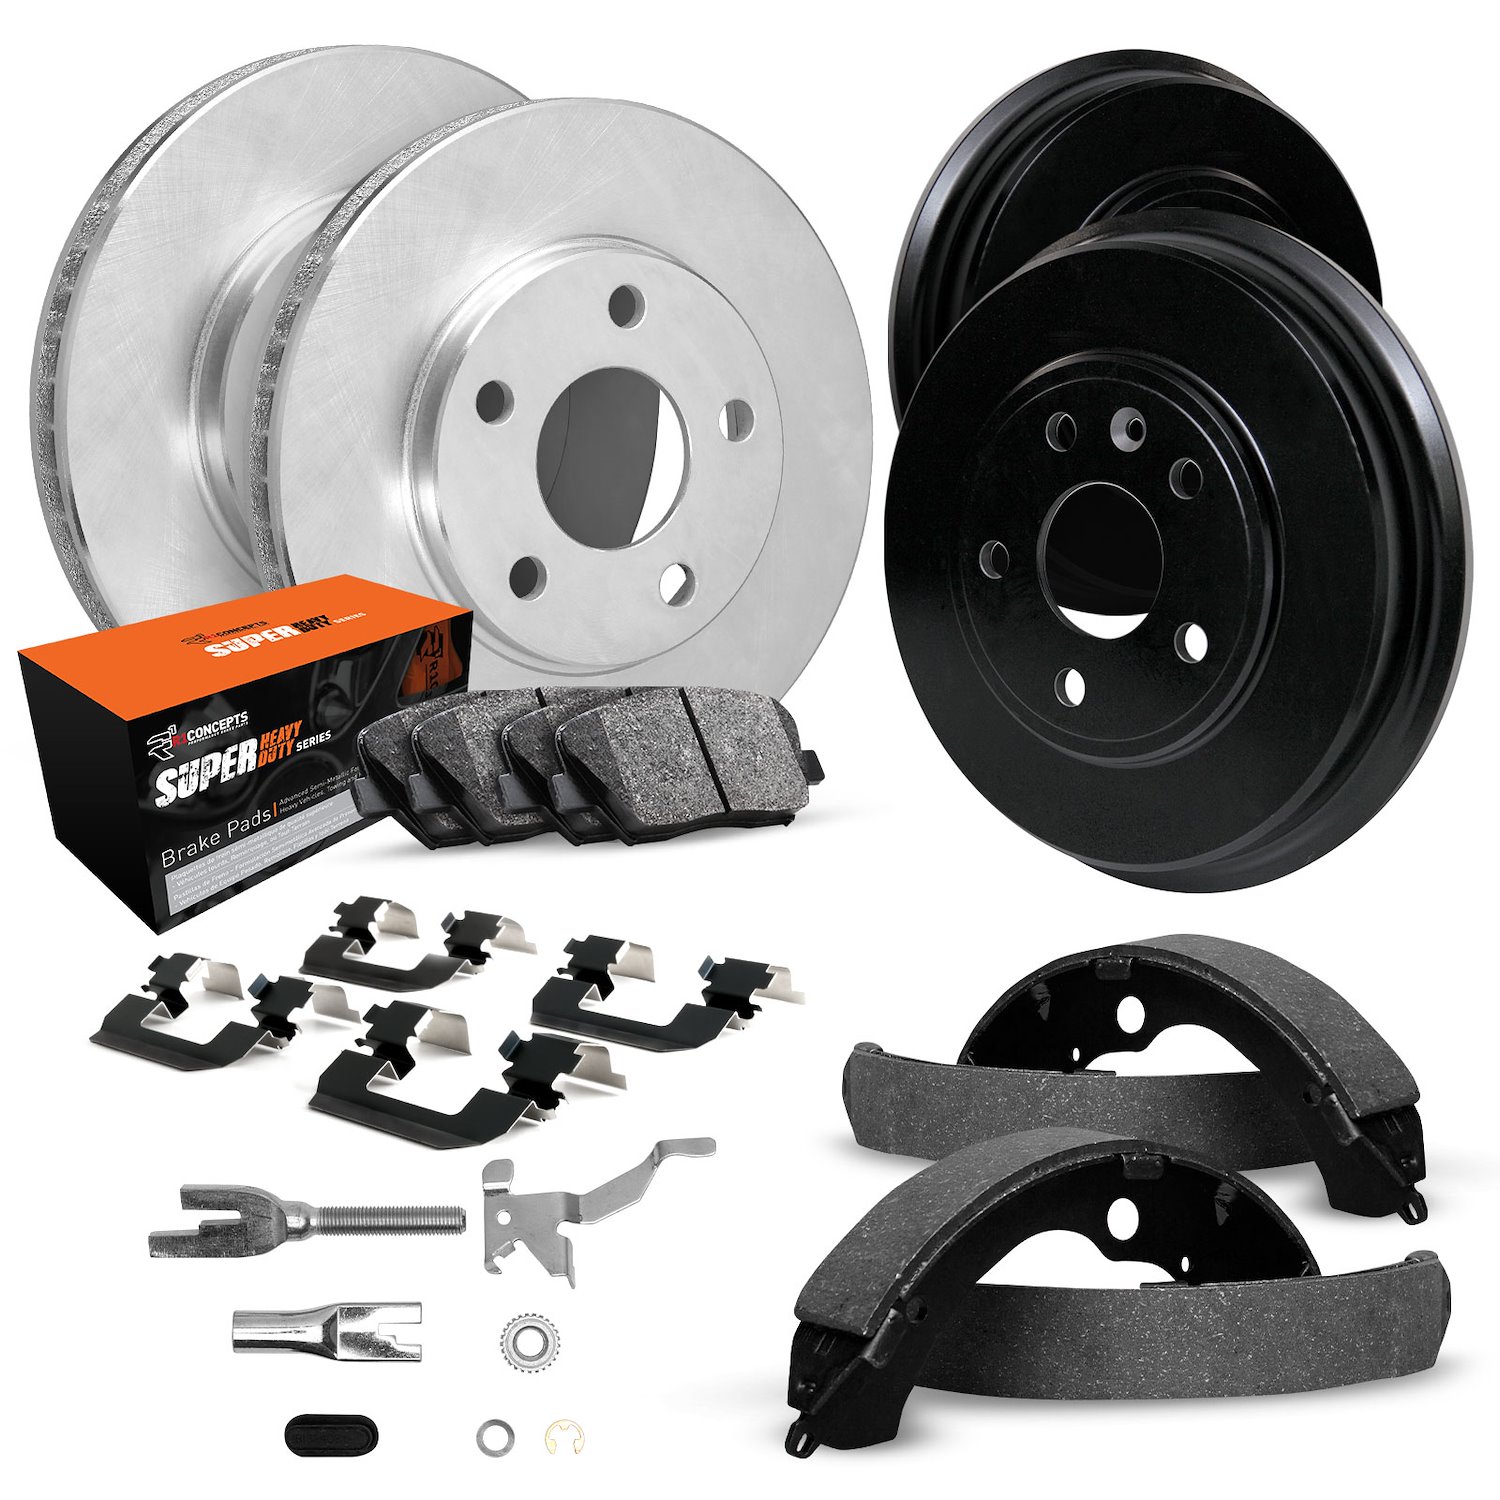 E-Line Blank Brake Rotor & Drum Set w/Super-Duty Pads, Shoes, Hardware, & Adjusters, 1992-2000 GM, Position: Front & Rear